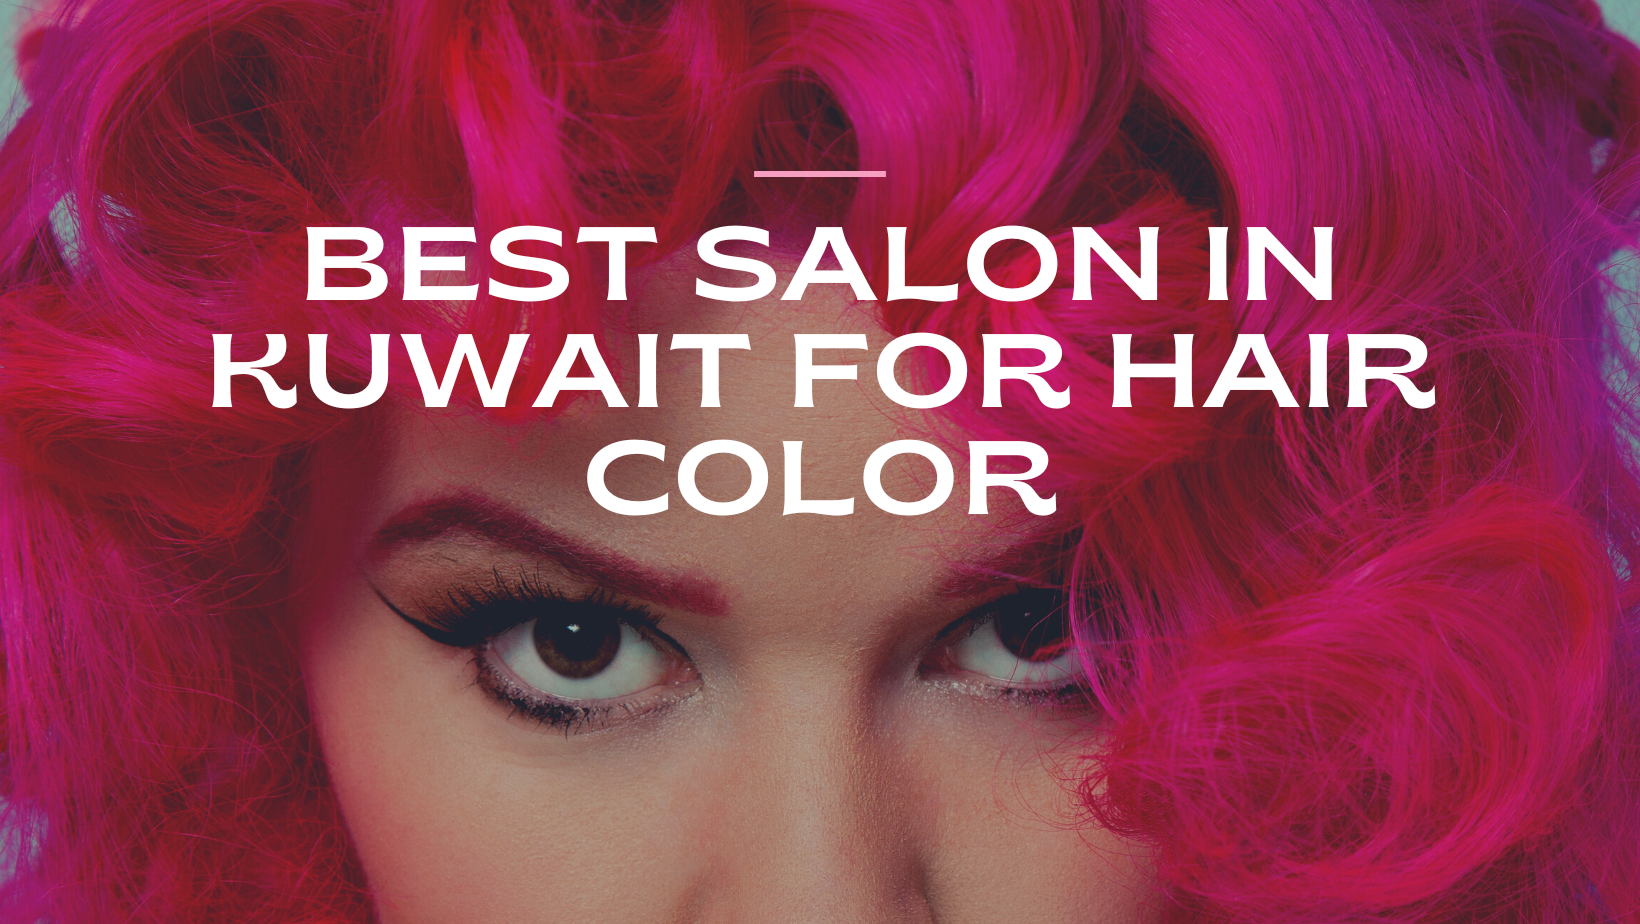 Best salon in Kuwait for hair color